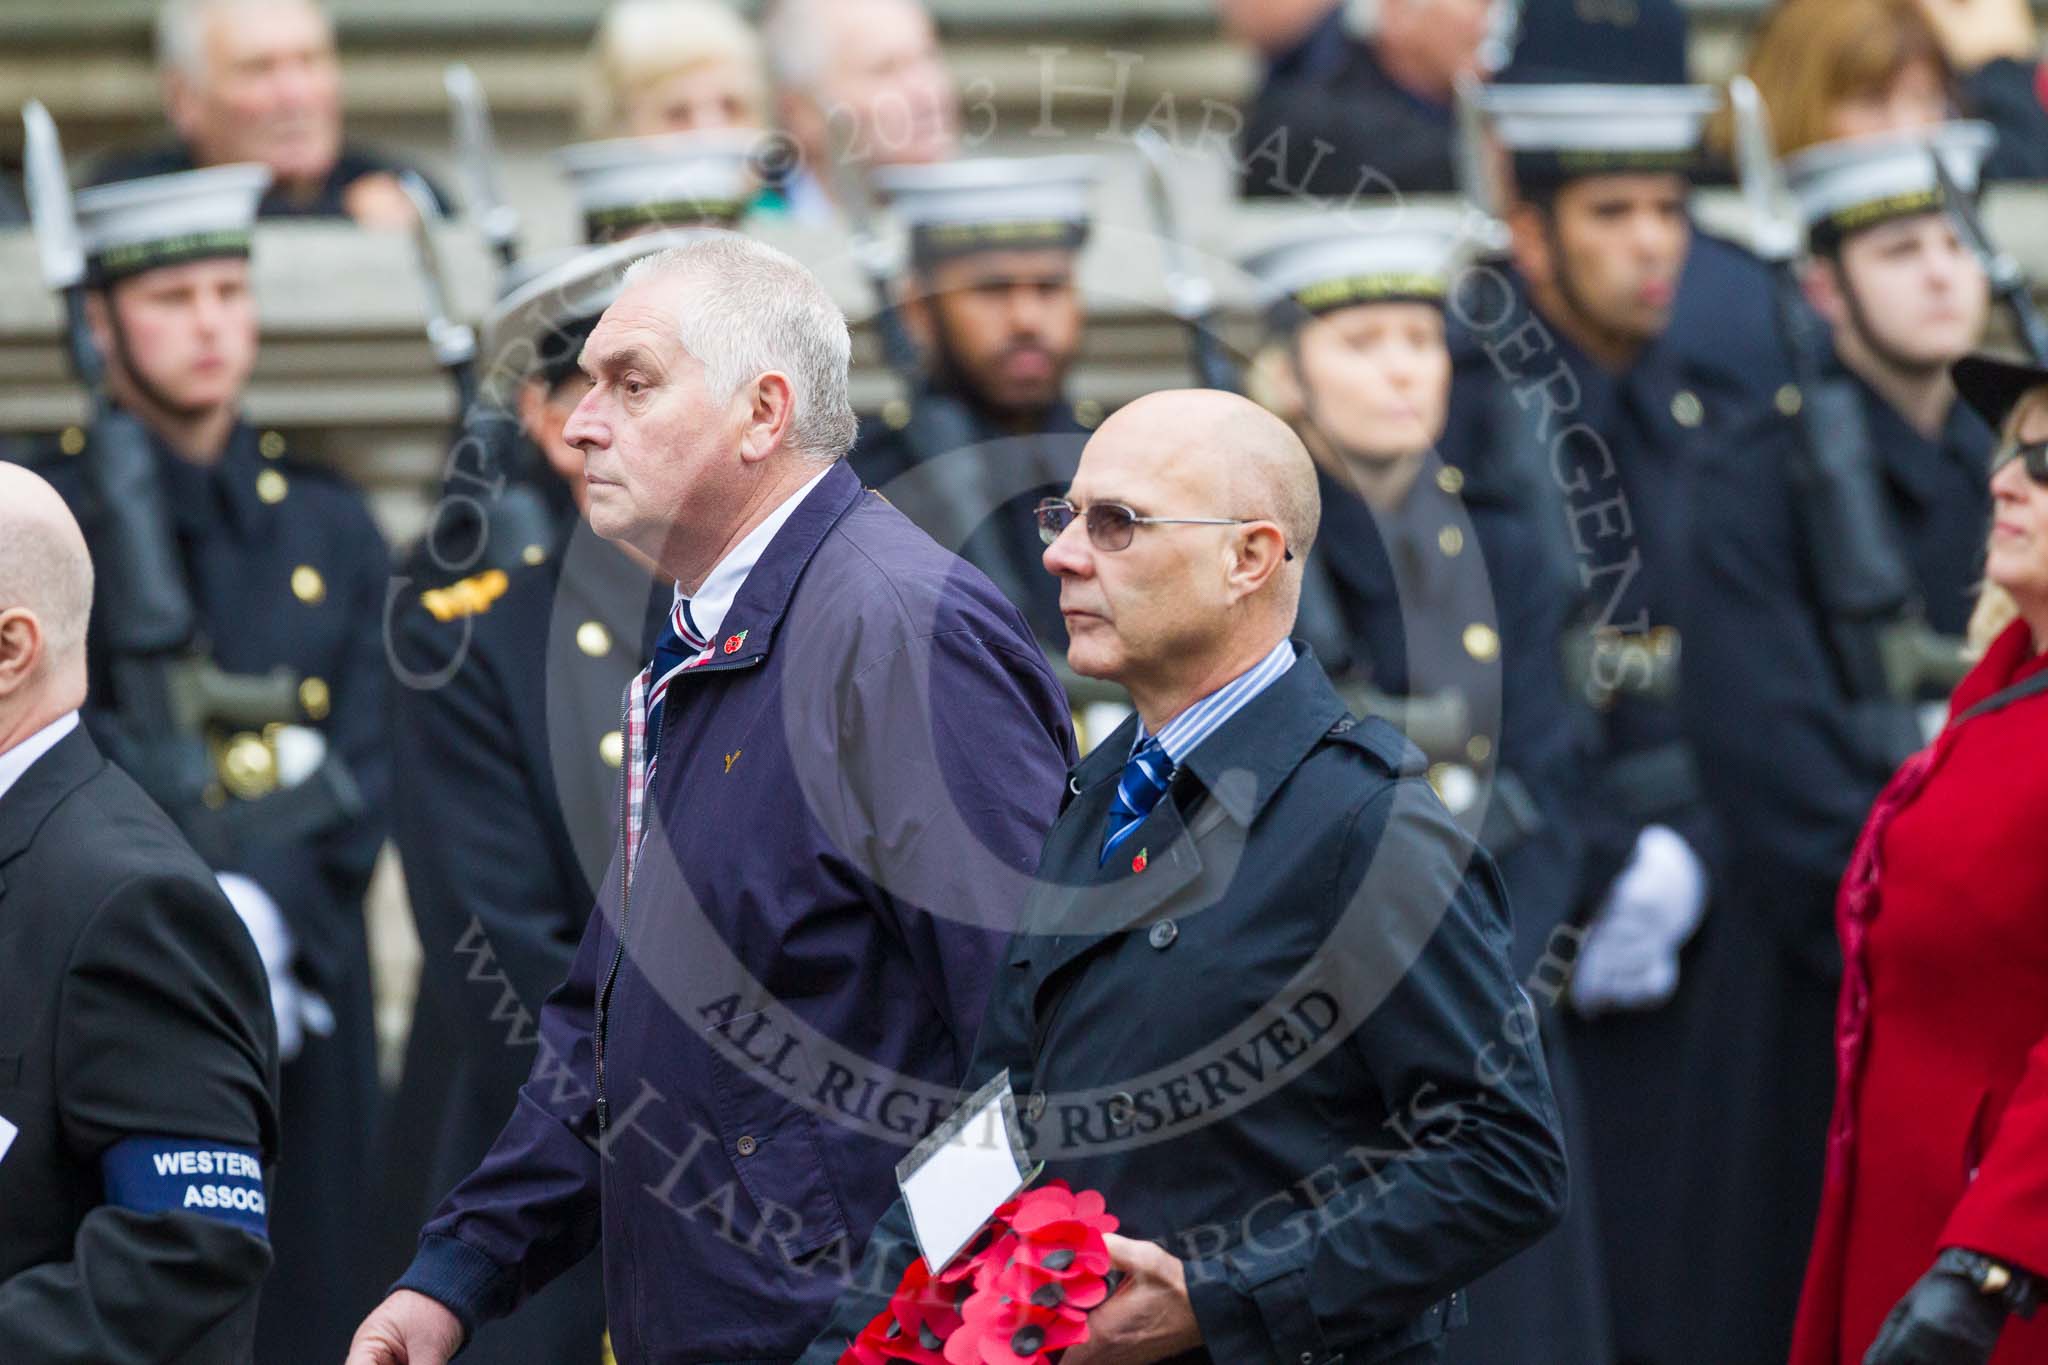 Remembrance Sunday at the Cenotaph 2015: Group M37, Western Front Association.
Cenotaph, Whitehall, London SW1,
London,
Greater London,
United Kingdom,
on 08 November 2015 at 12:18, image #1652